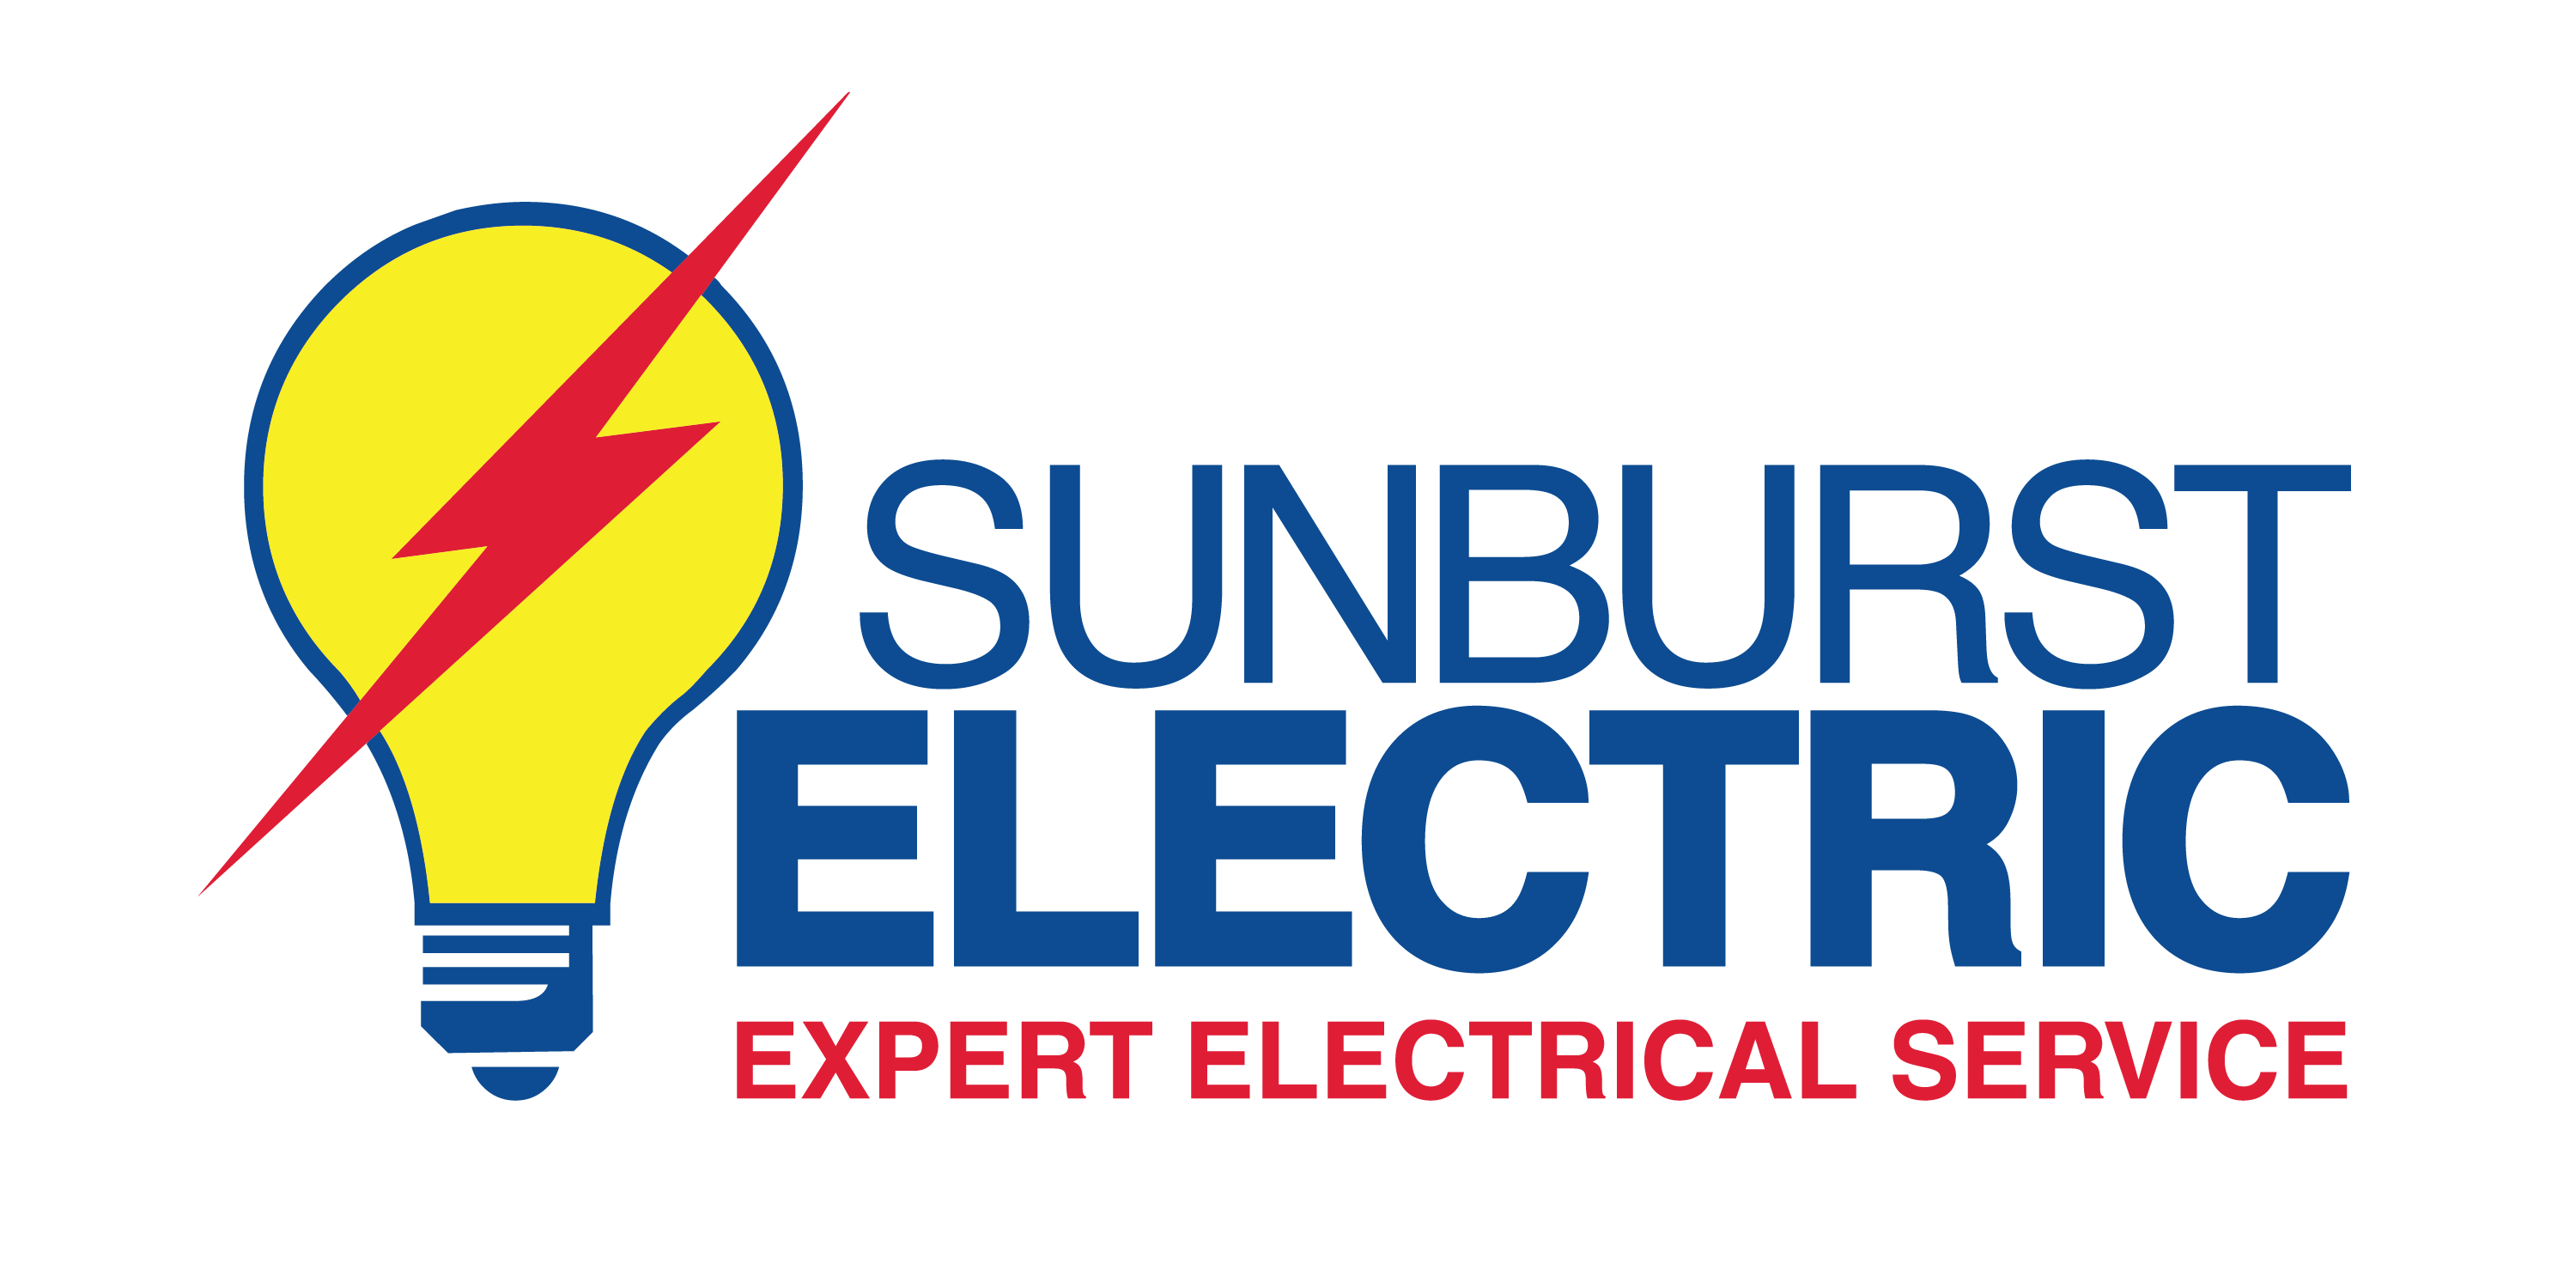 Electrical Service Logo - Sunburst Electric Electricians, Repair and Service, Electronics and ...